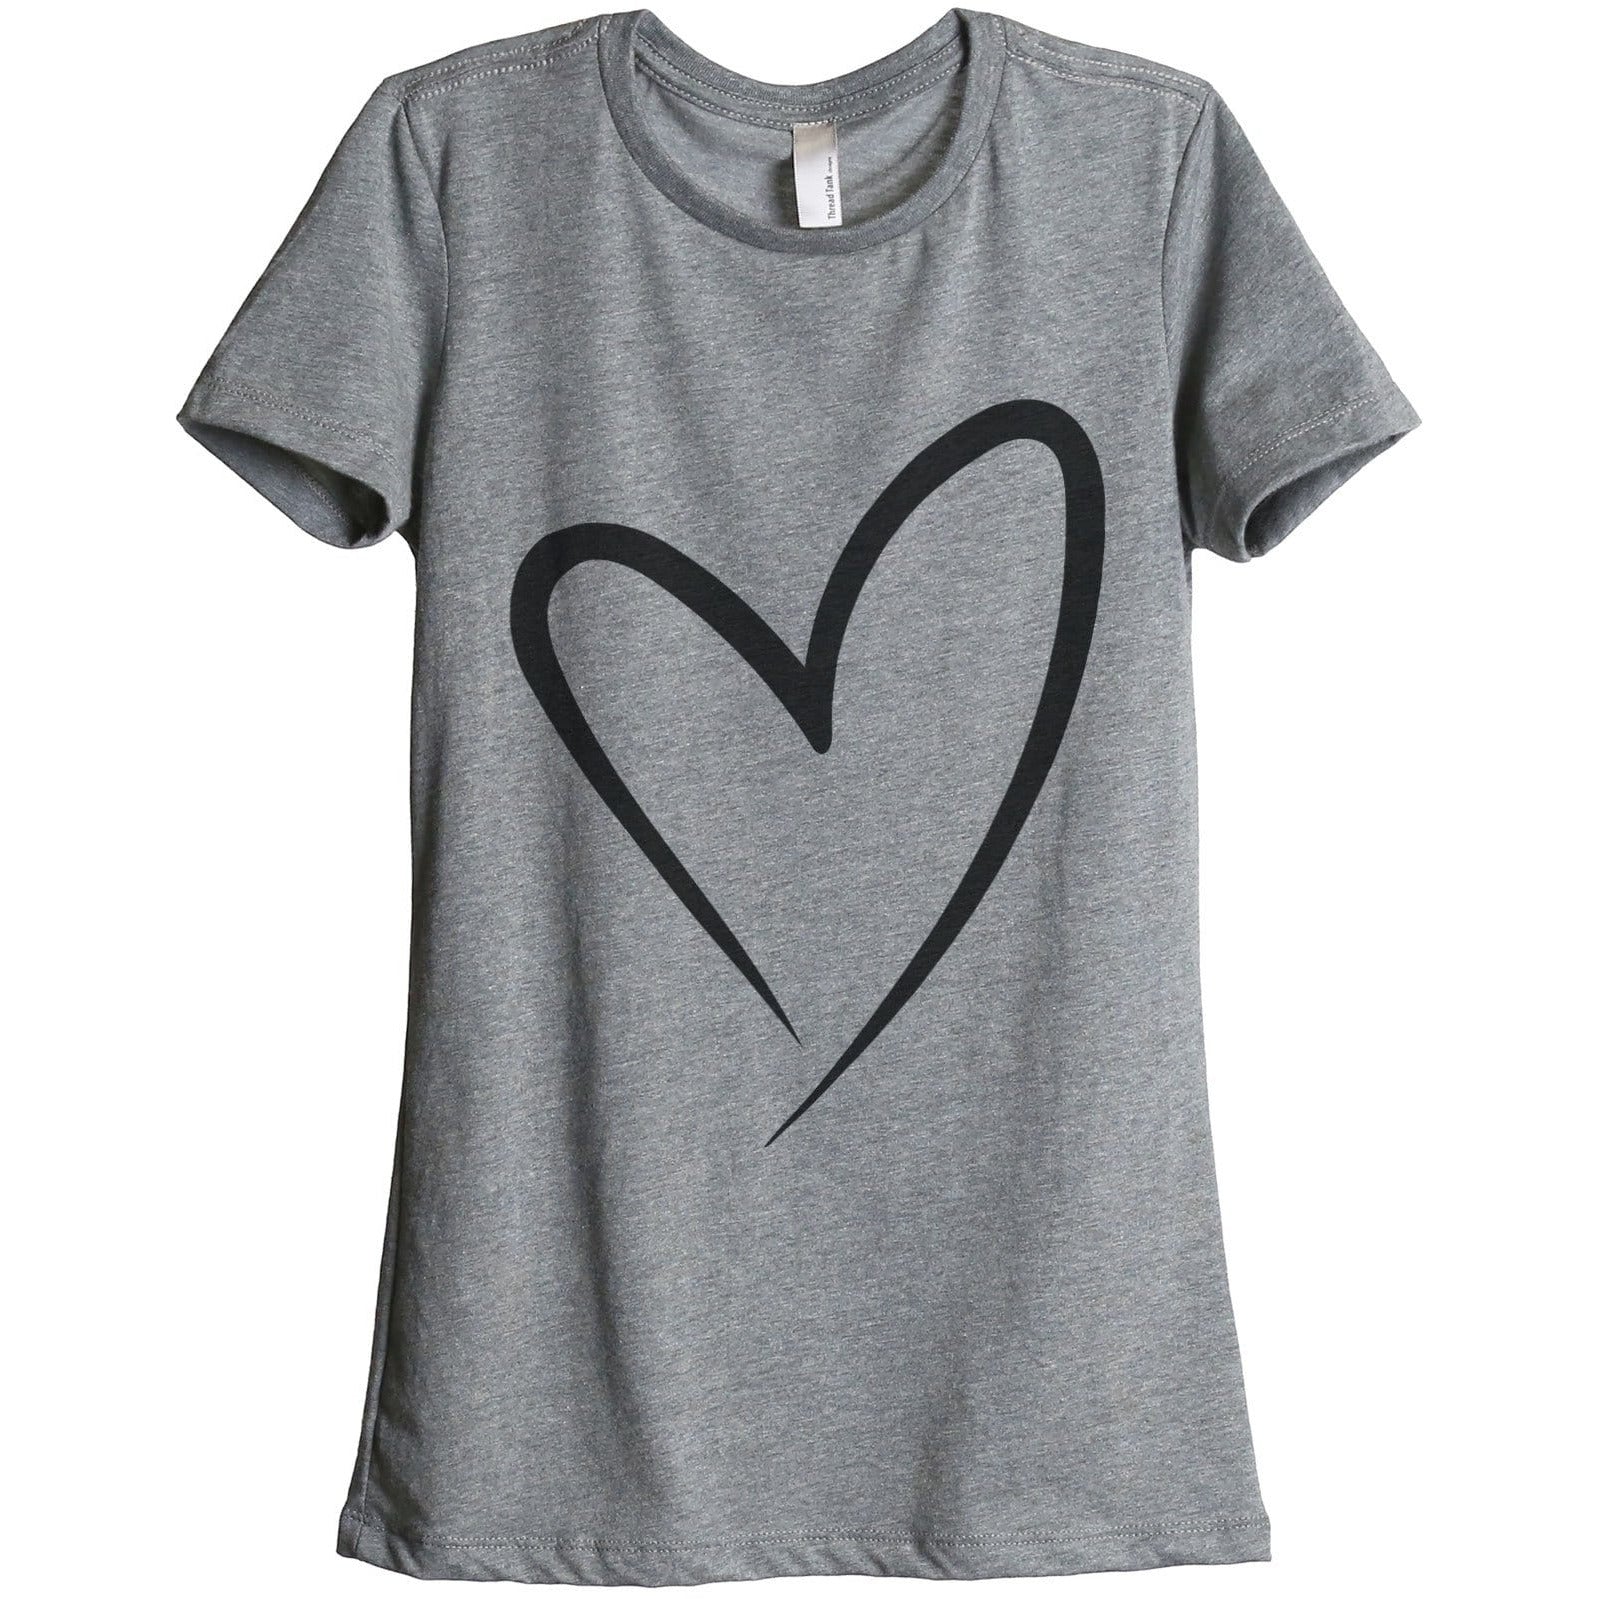 Simply Heart Women Relaxed Crew T-Shirt Tee Graphic Top - thread tank ...